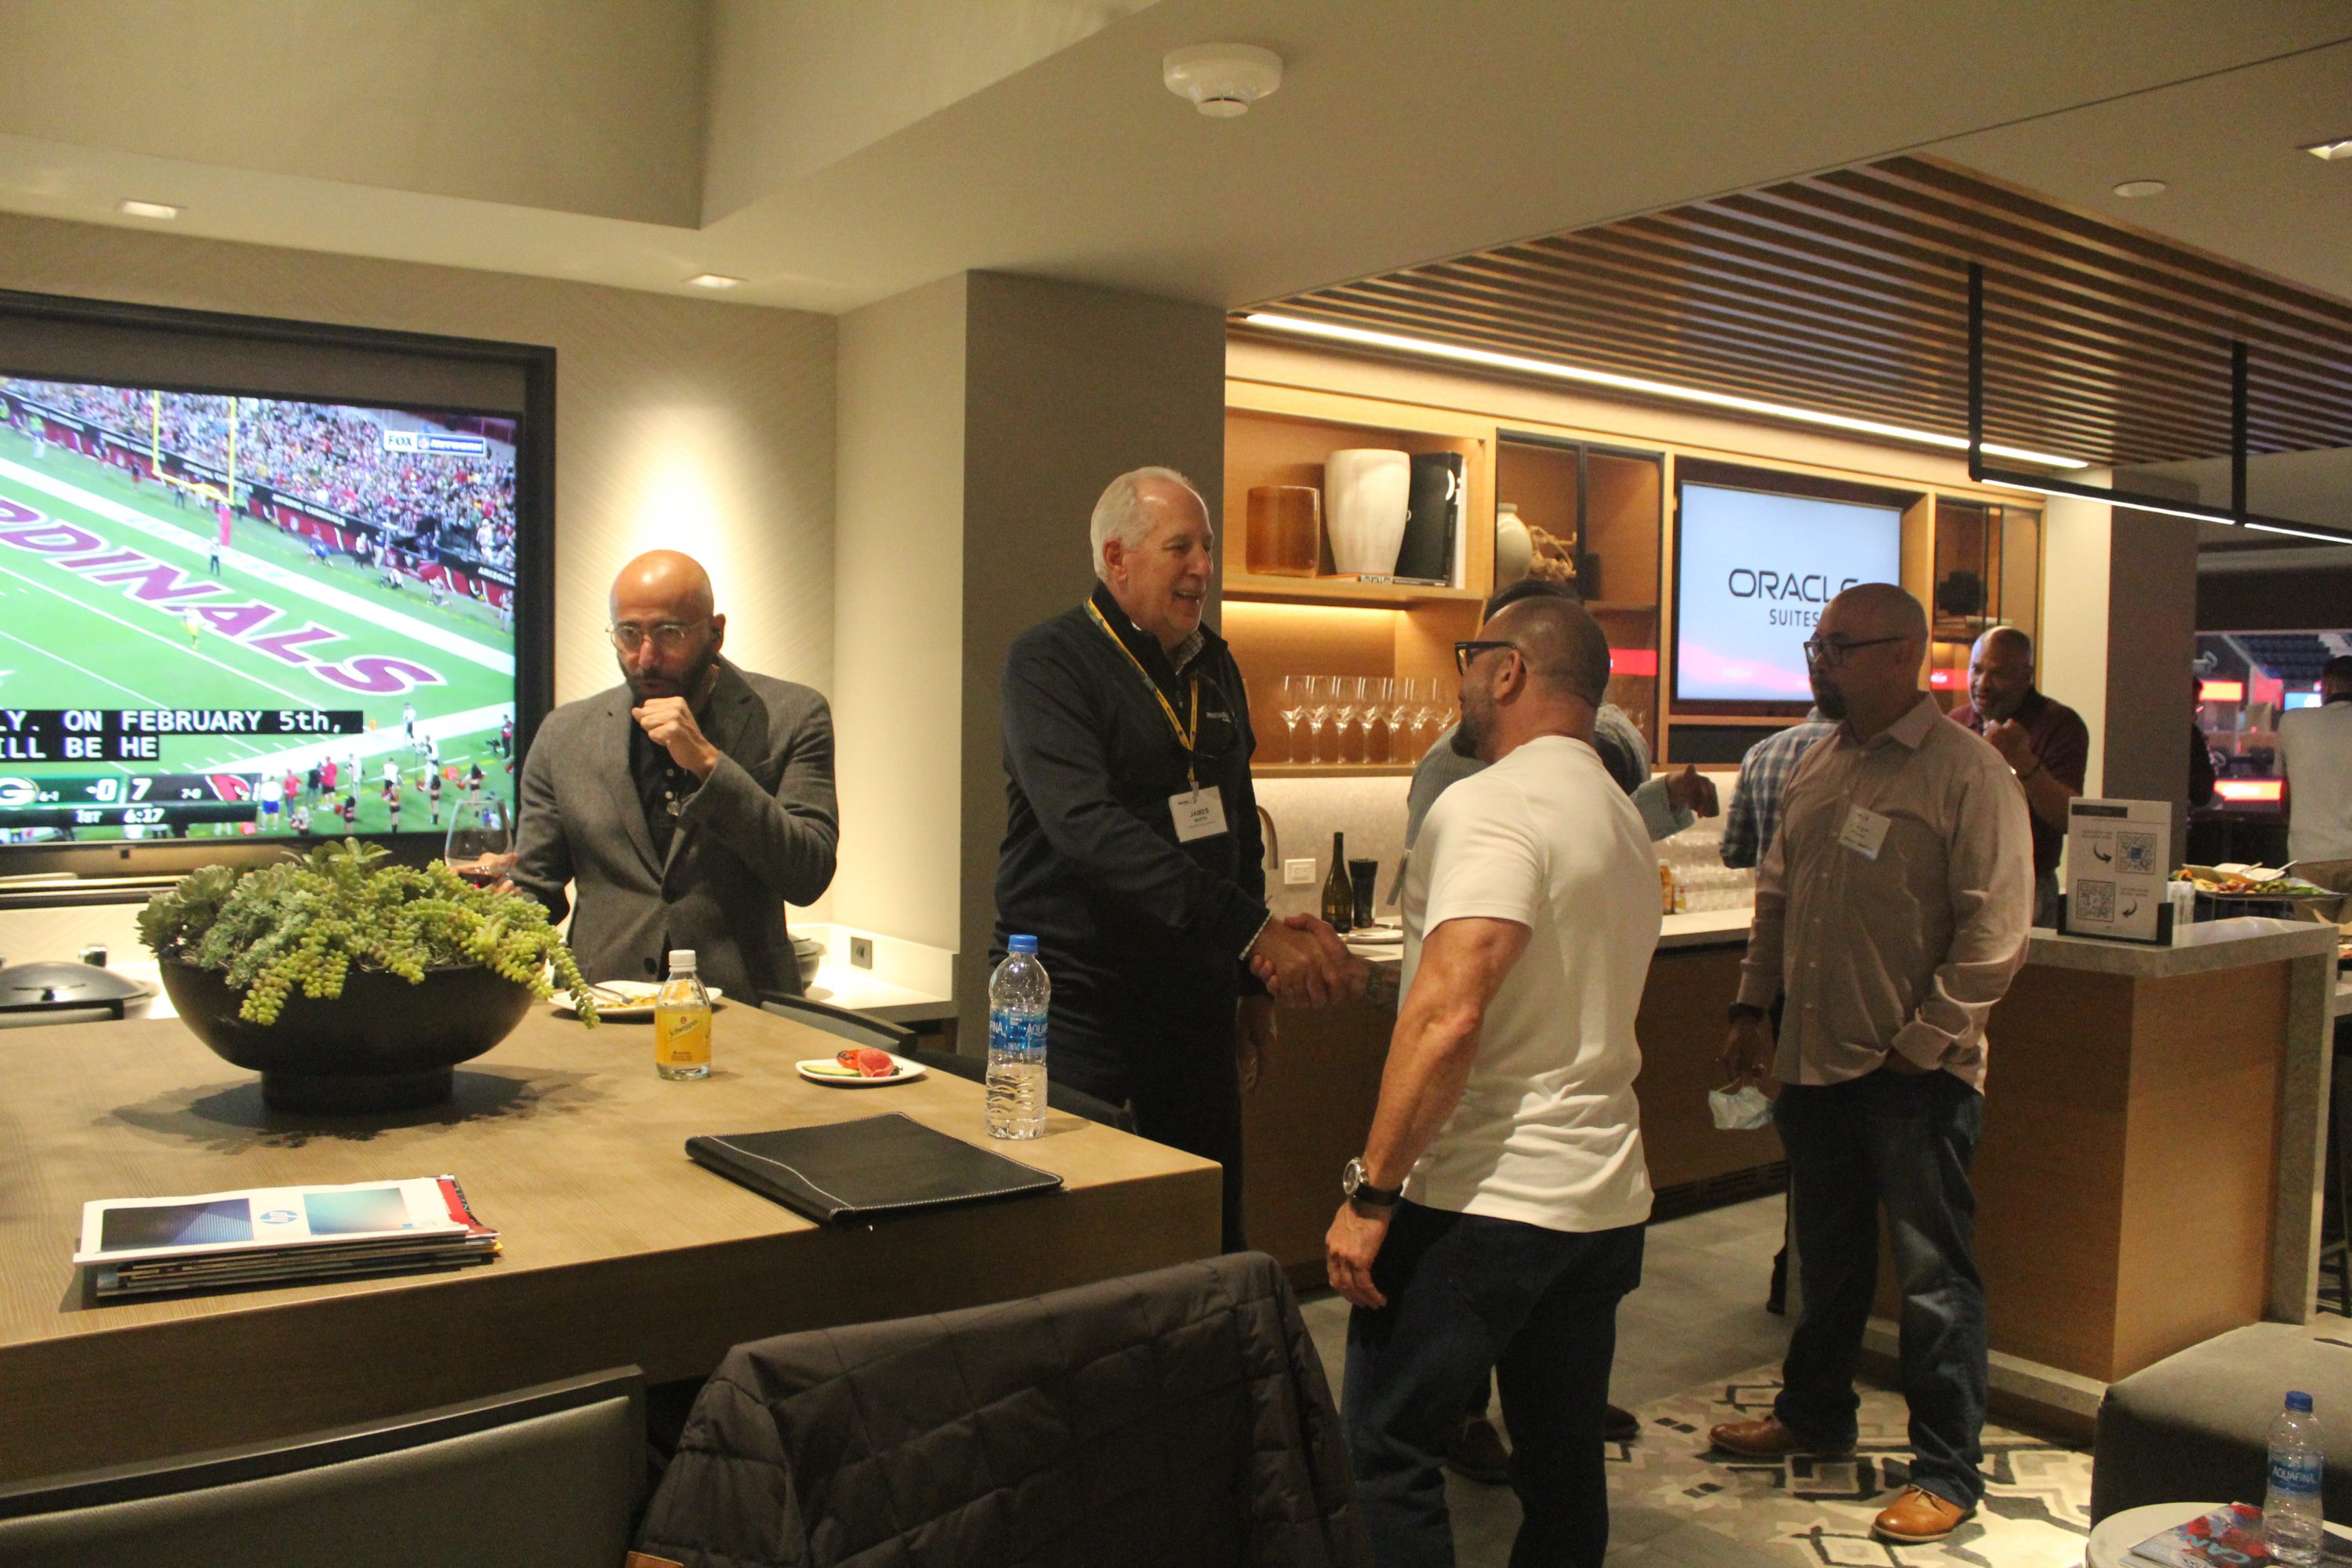 Attendees enjoy the suite at the Chase Center in San Francisco for the Warriors vs Grizzlies basketball game.